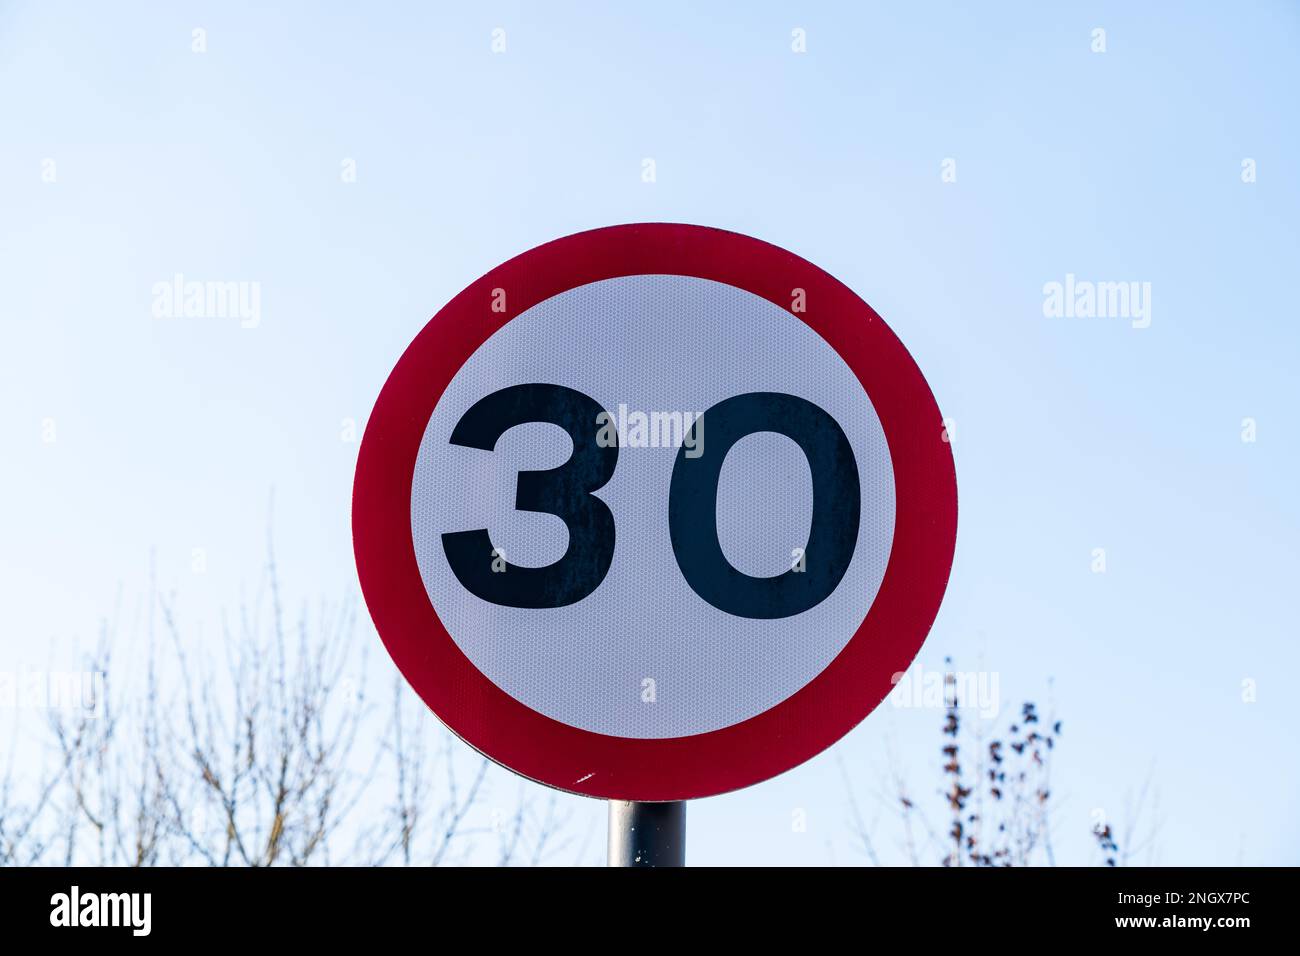 UK Traffic sign showing.a 30 mph maximum speed limit with a red and white warning circle Stock Photo